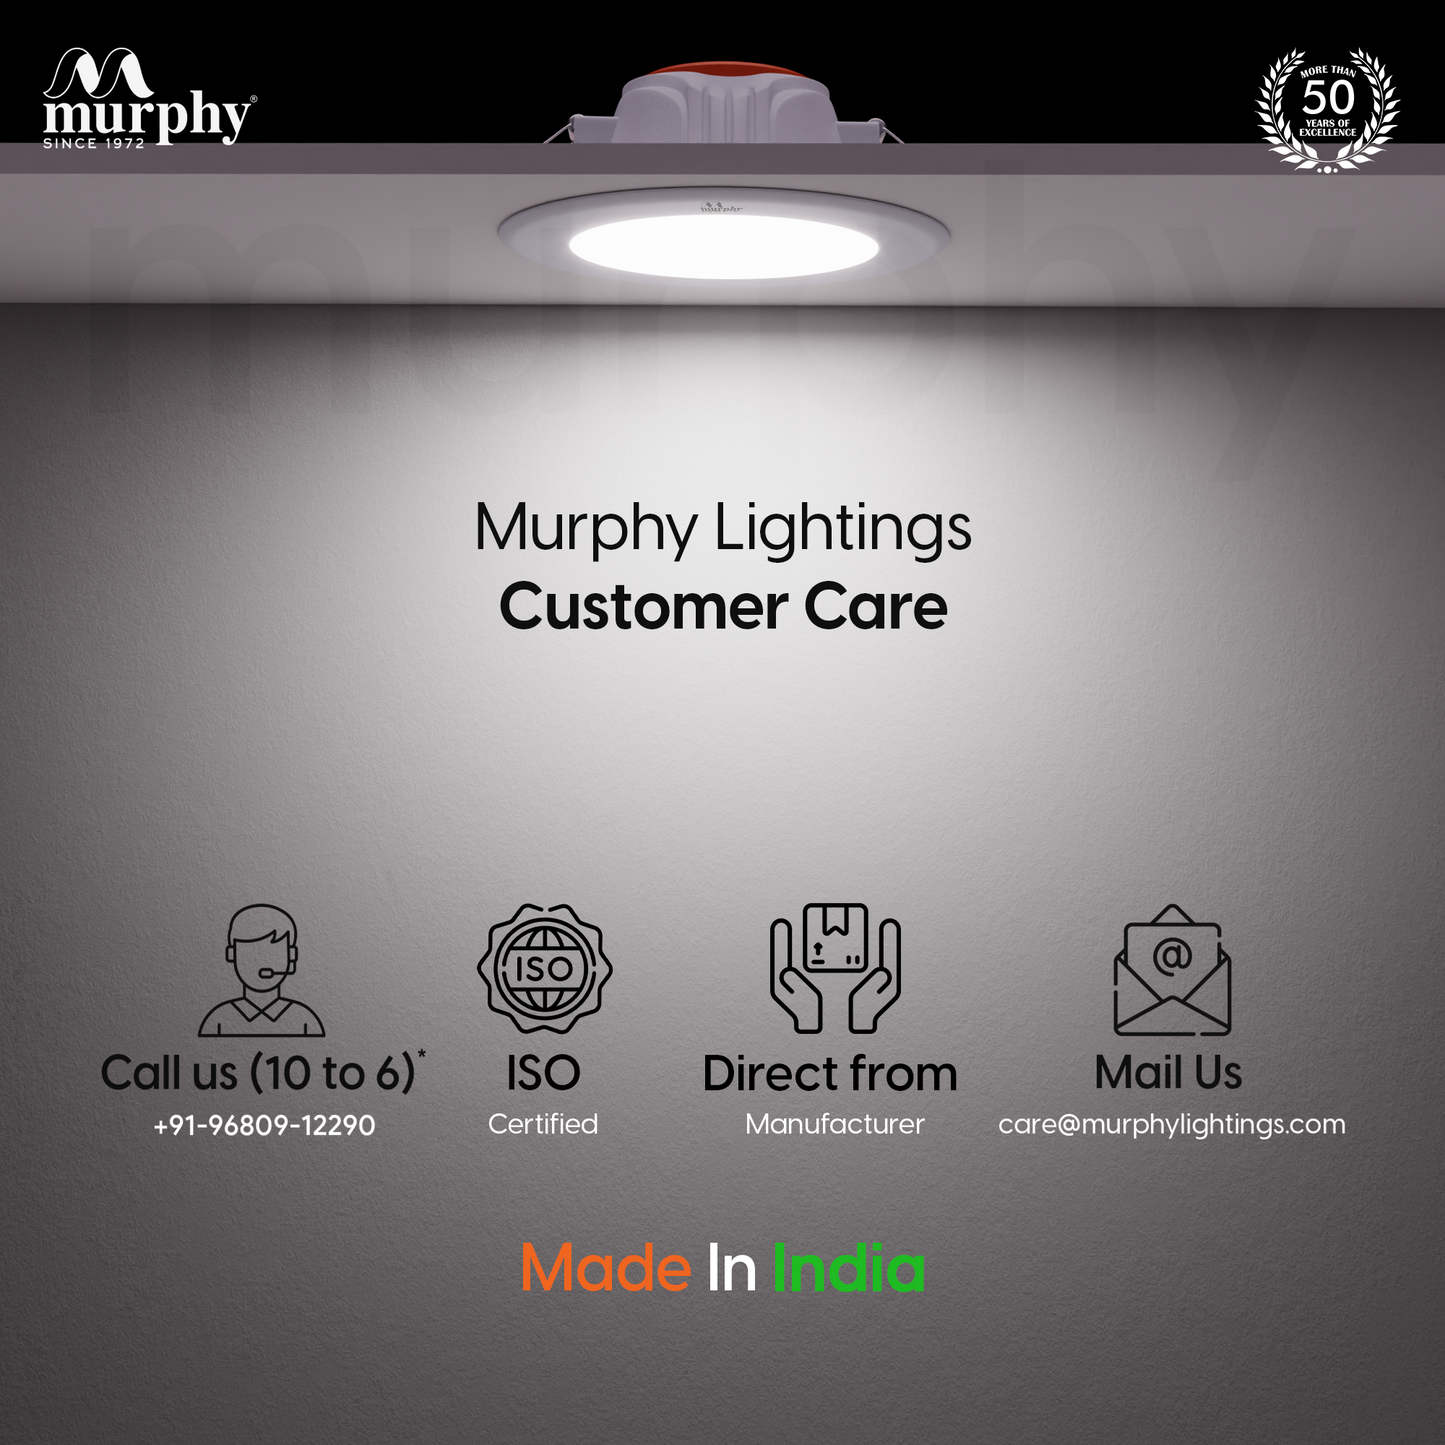 Murphy 7W CORAL LED Concealed Box Down Light